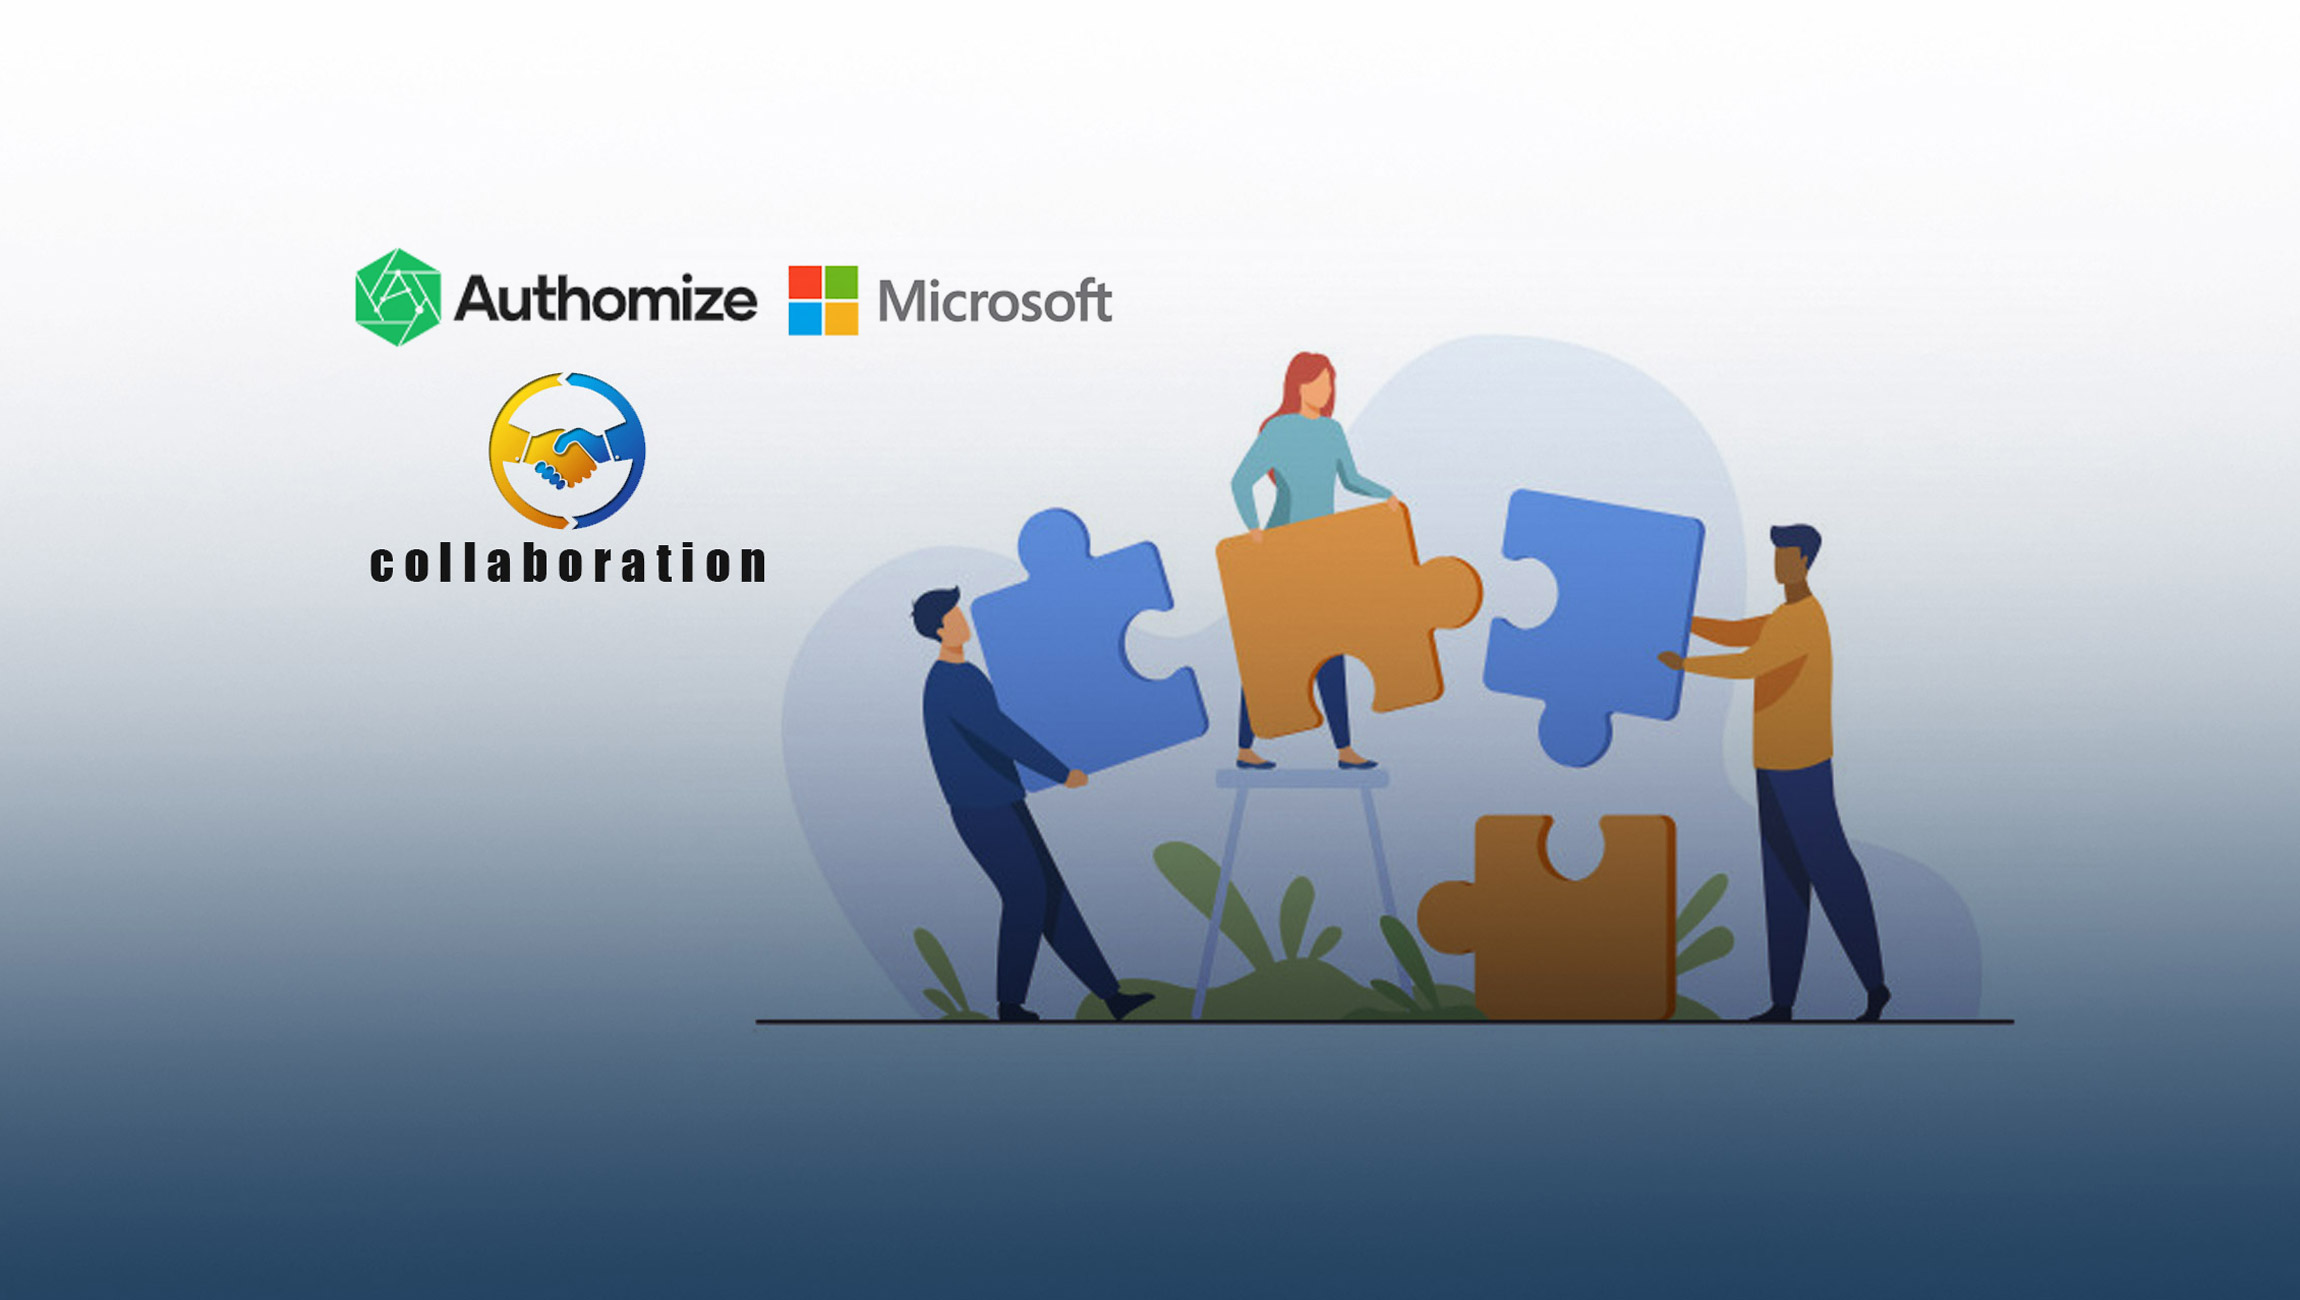 Authomize Announces Collaboration with Microsoft, Providing Customers Secure and Automated Permission Management